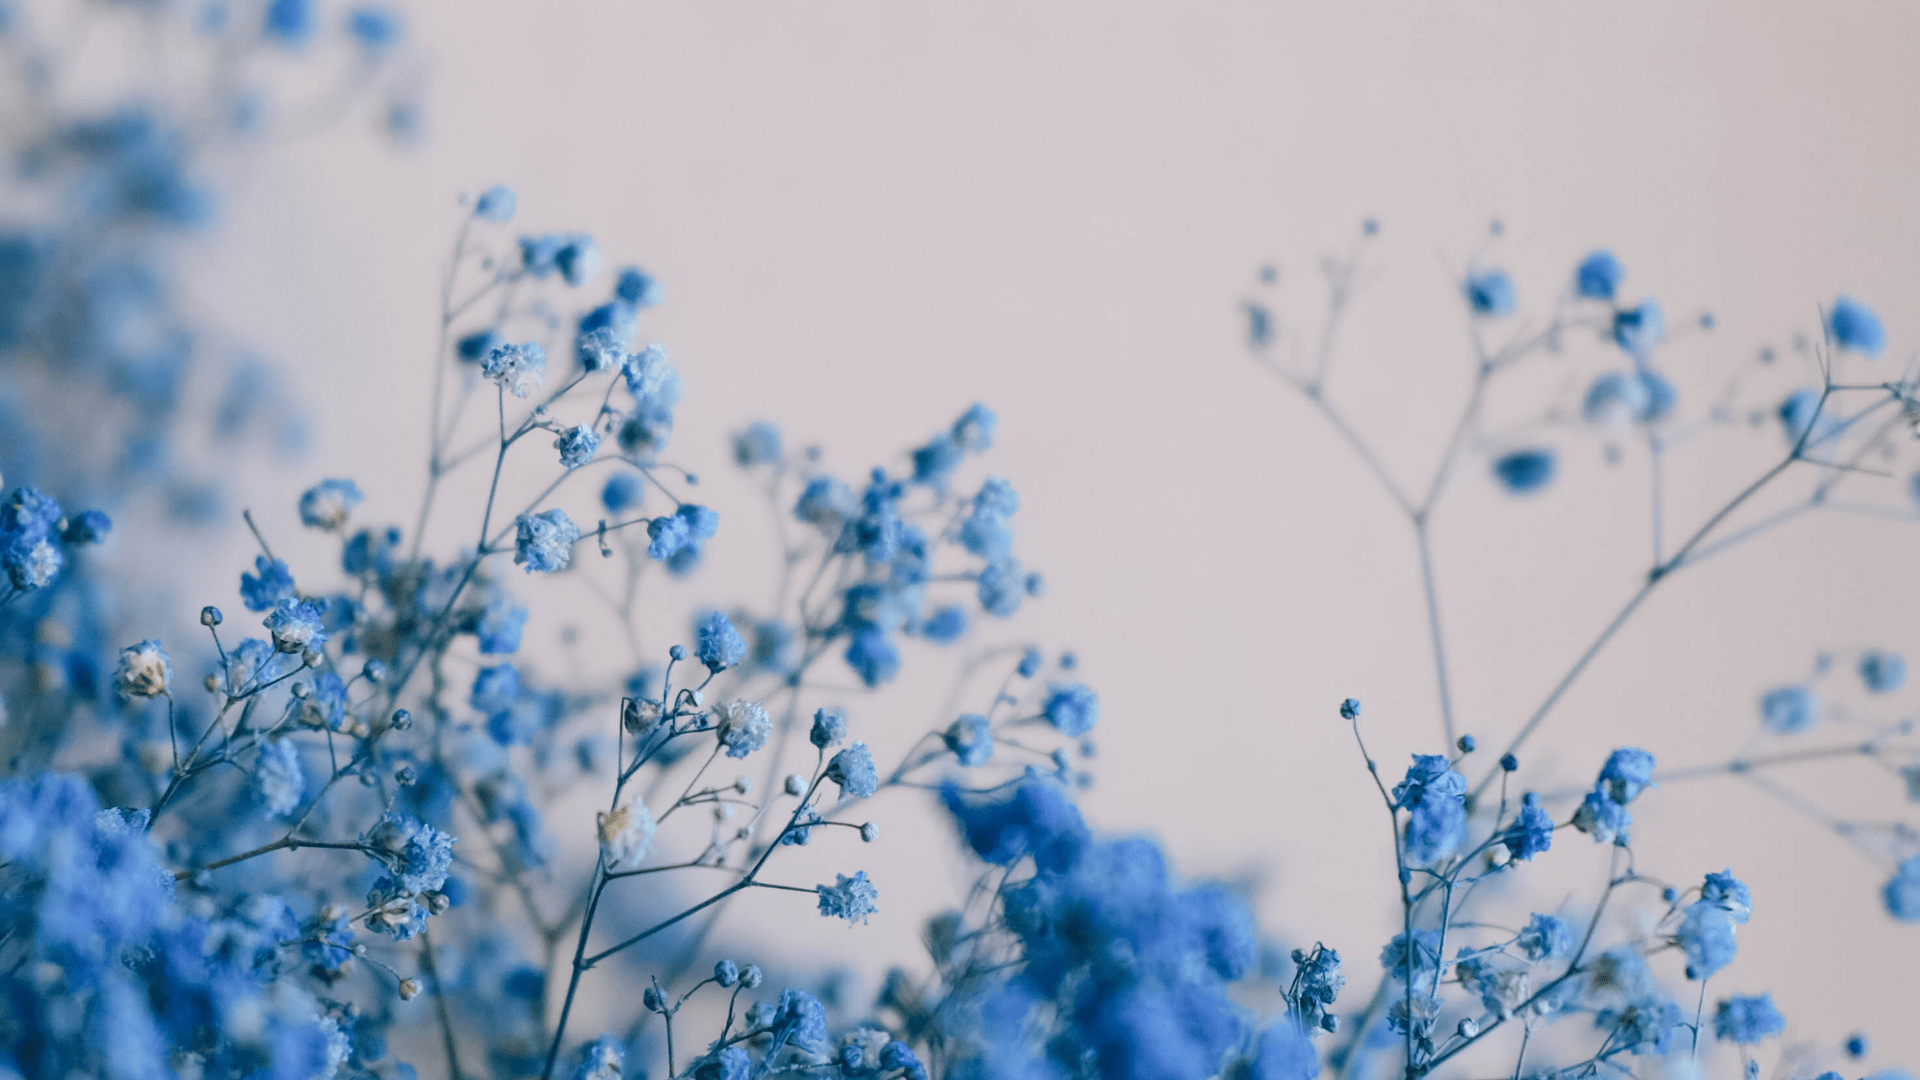 Blue flowers on a white background - Laptop, blue